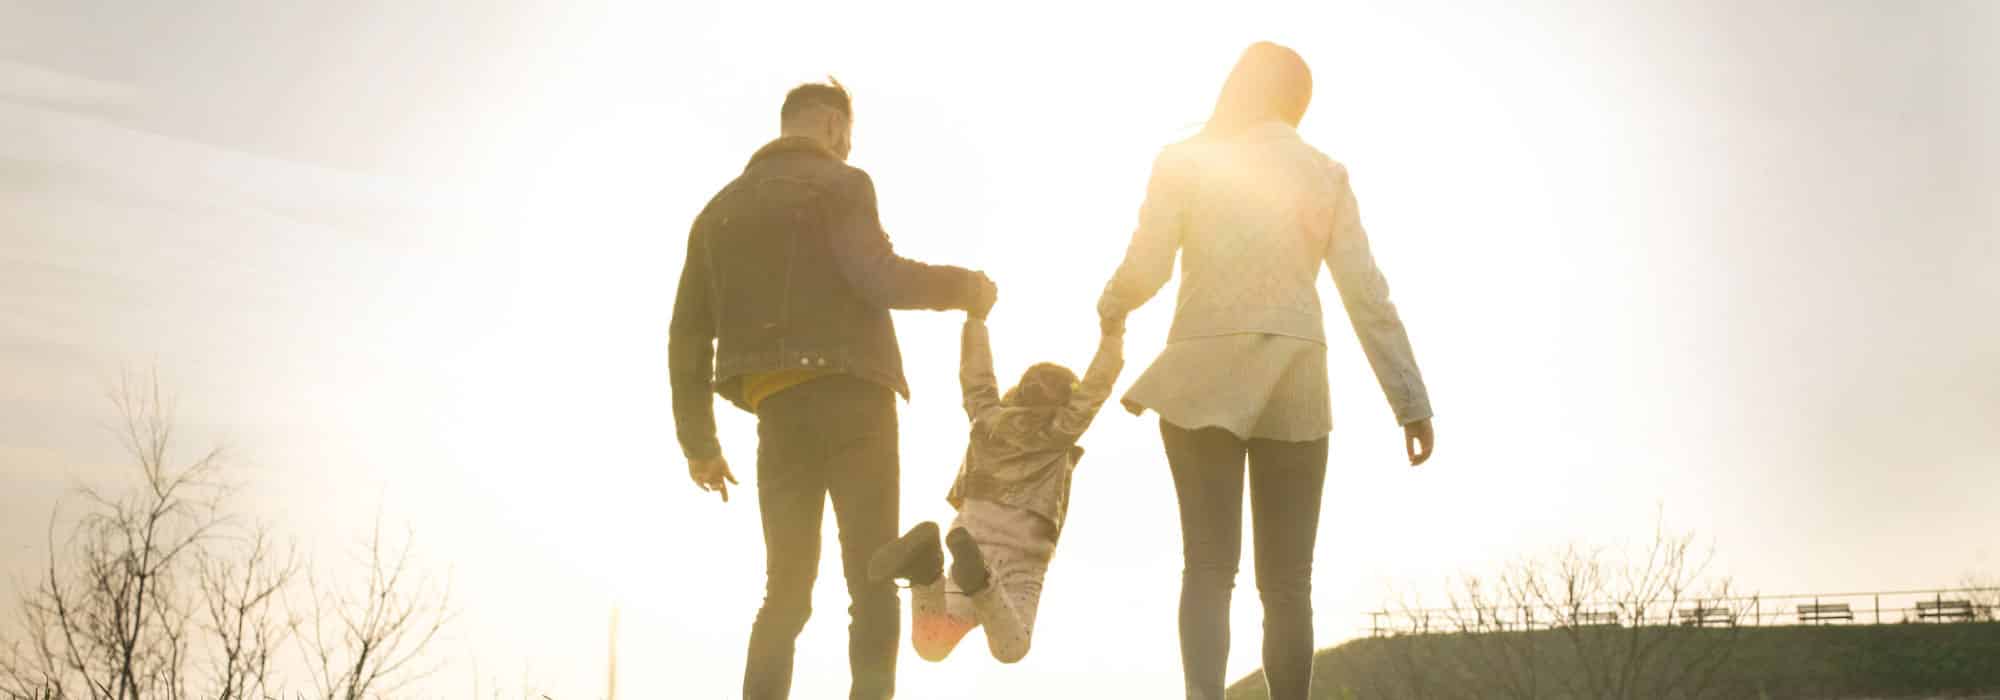 A family appearing to be on a walk. The couple has a child between them, they are each holding the child's hand and swinging them back and forth.